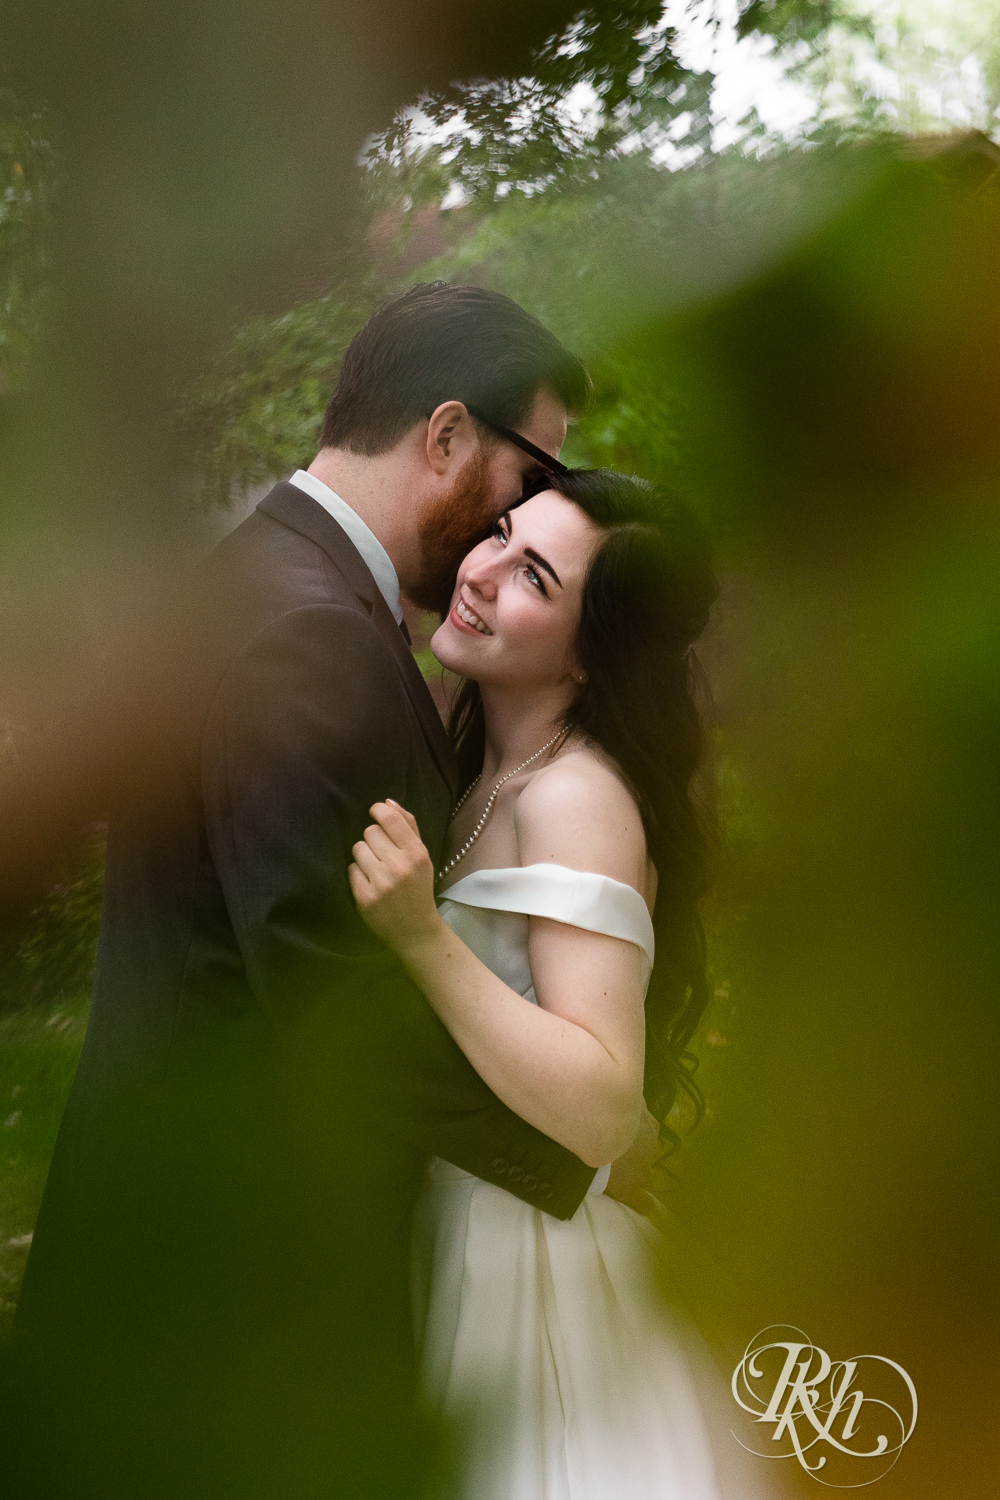 Bride and groom kiss in trees at their house wedding in Sartell, Minnesota.